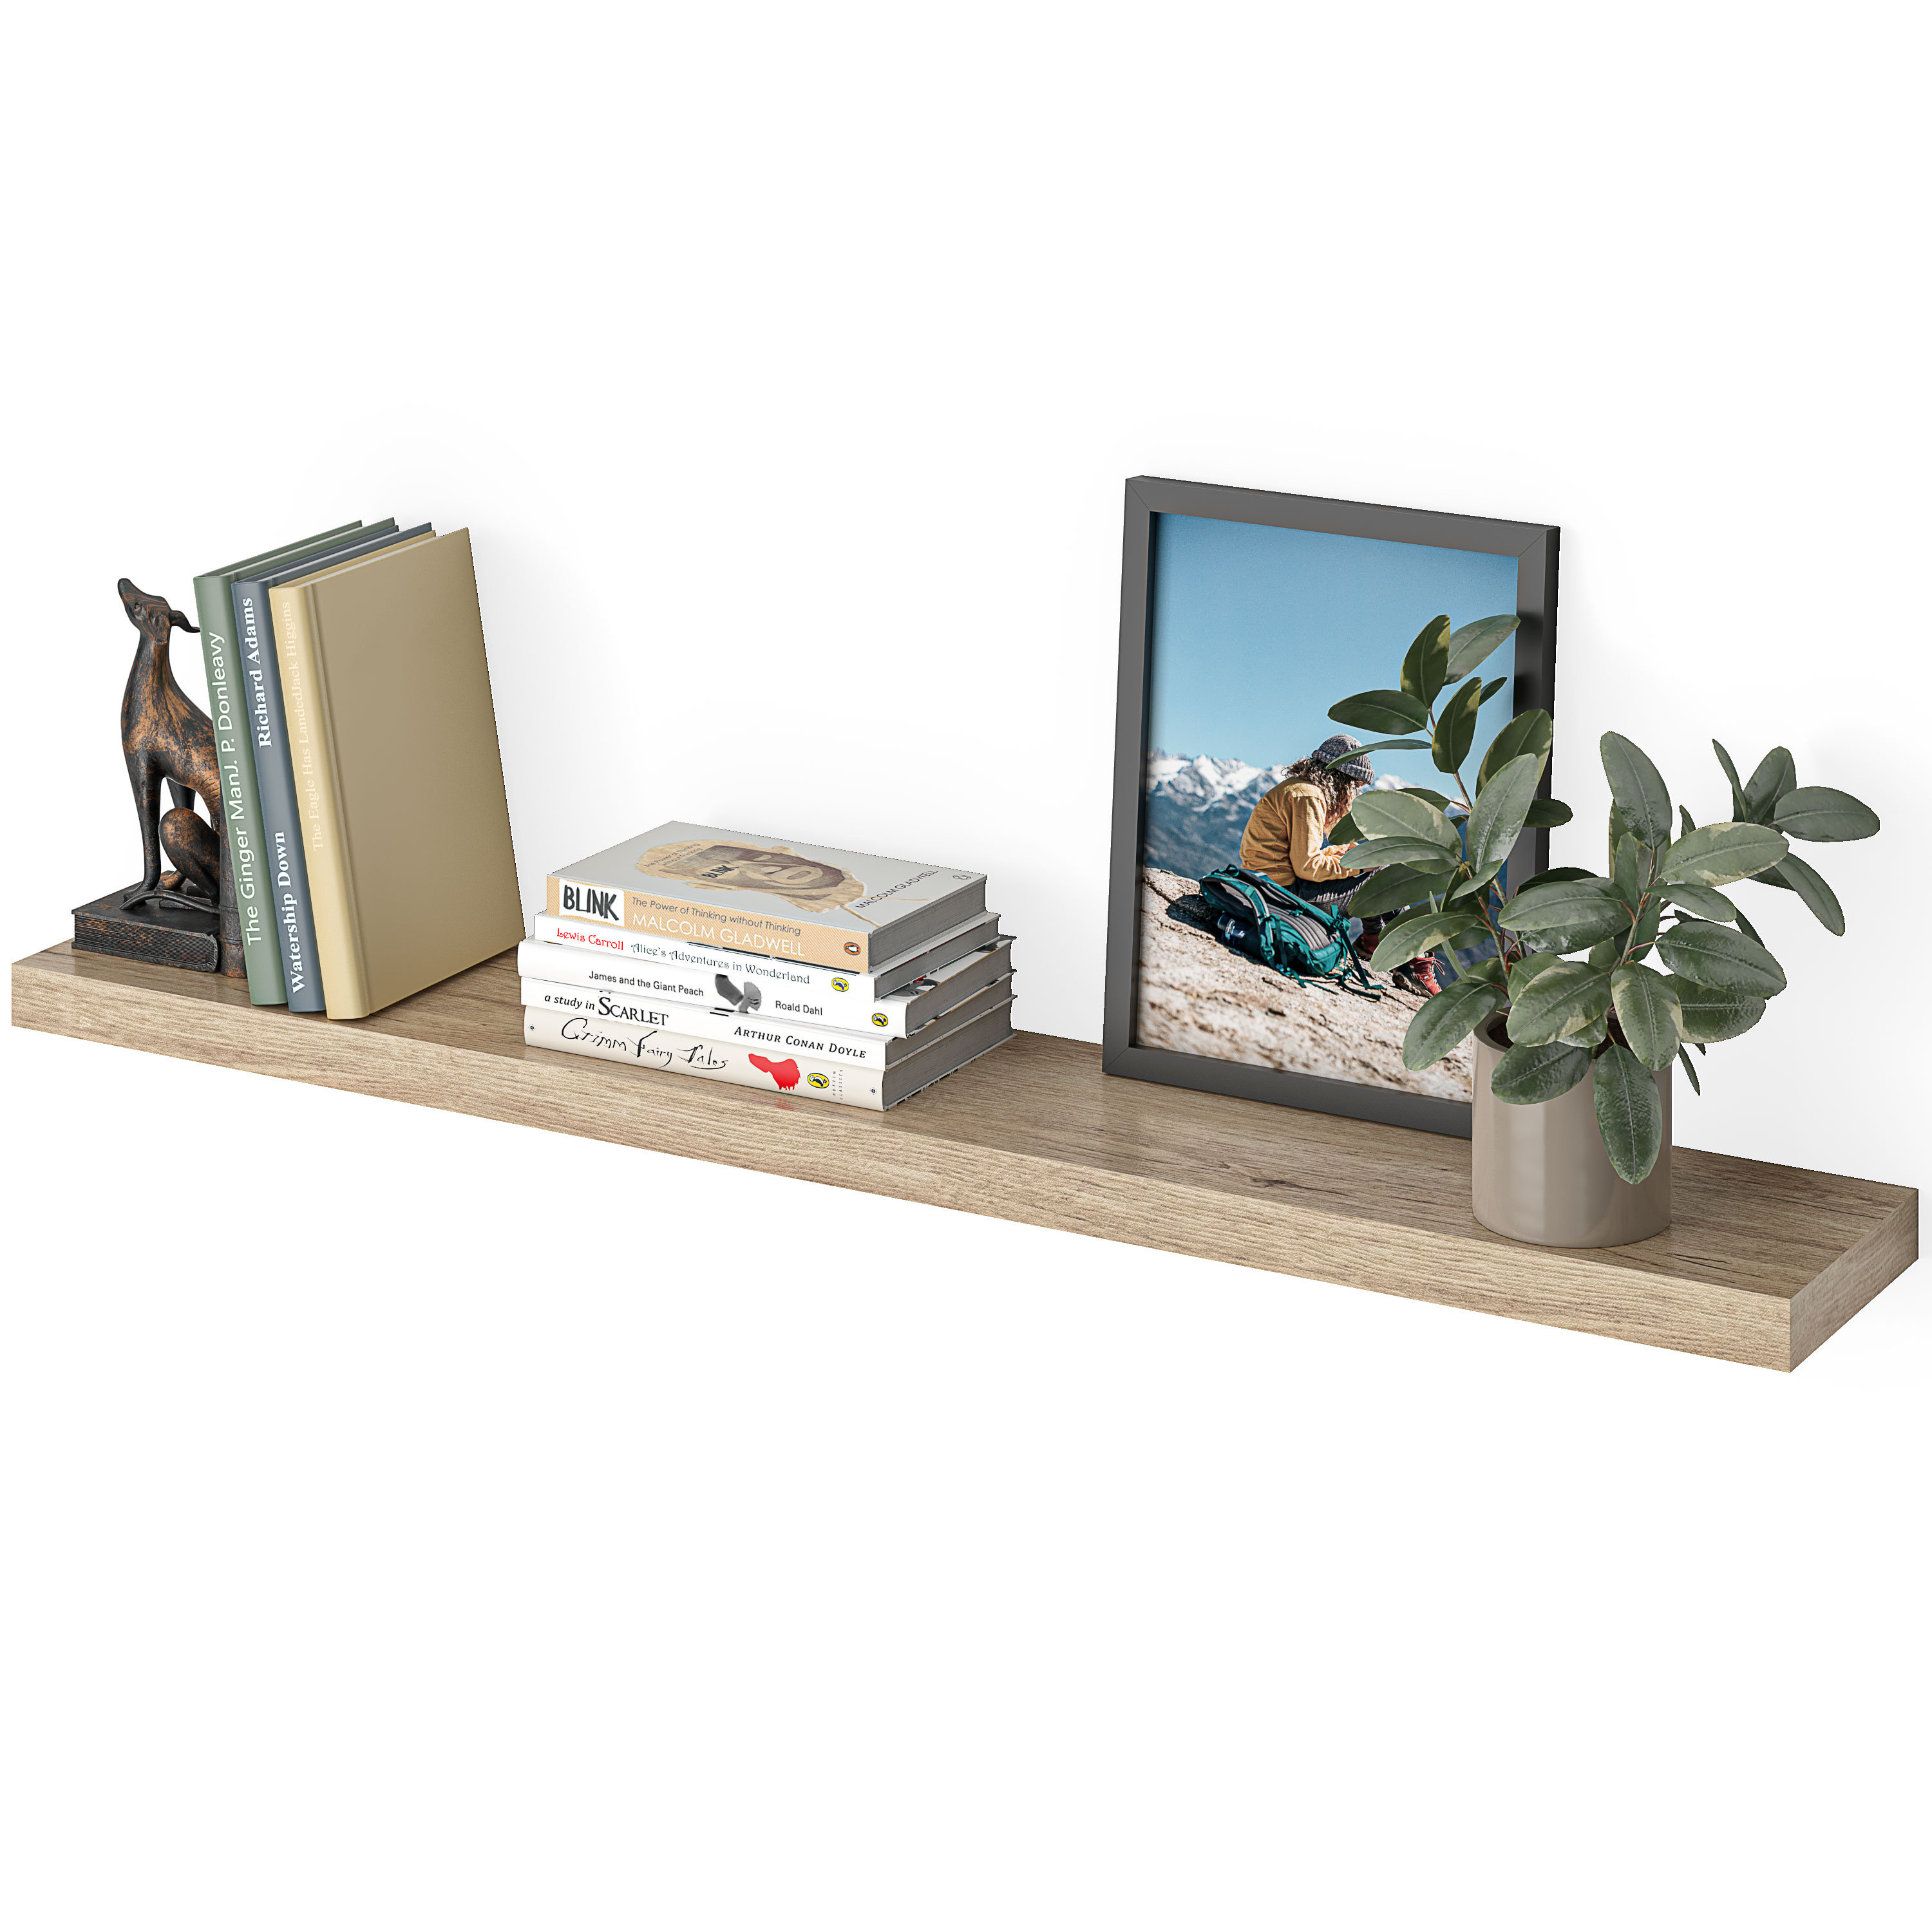 56 in. W x 2 in. D Modern Wall Mount Floating Shelves Long Narrow Picture Ledge (Set of 2) Decorative Wall Shelf